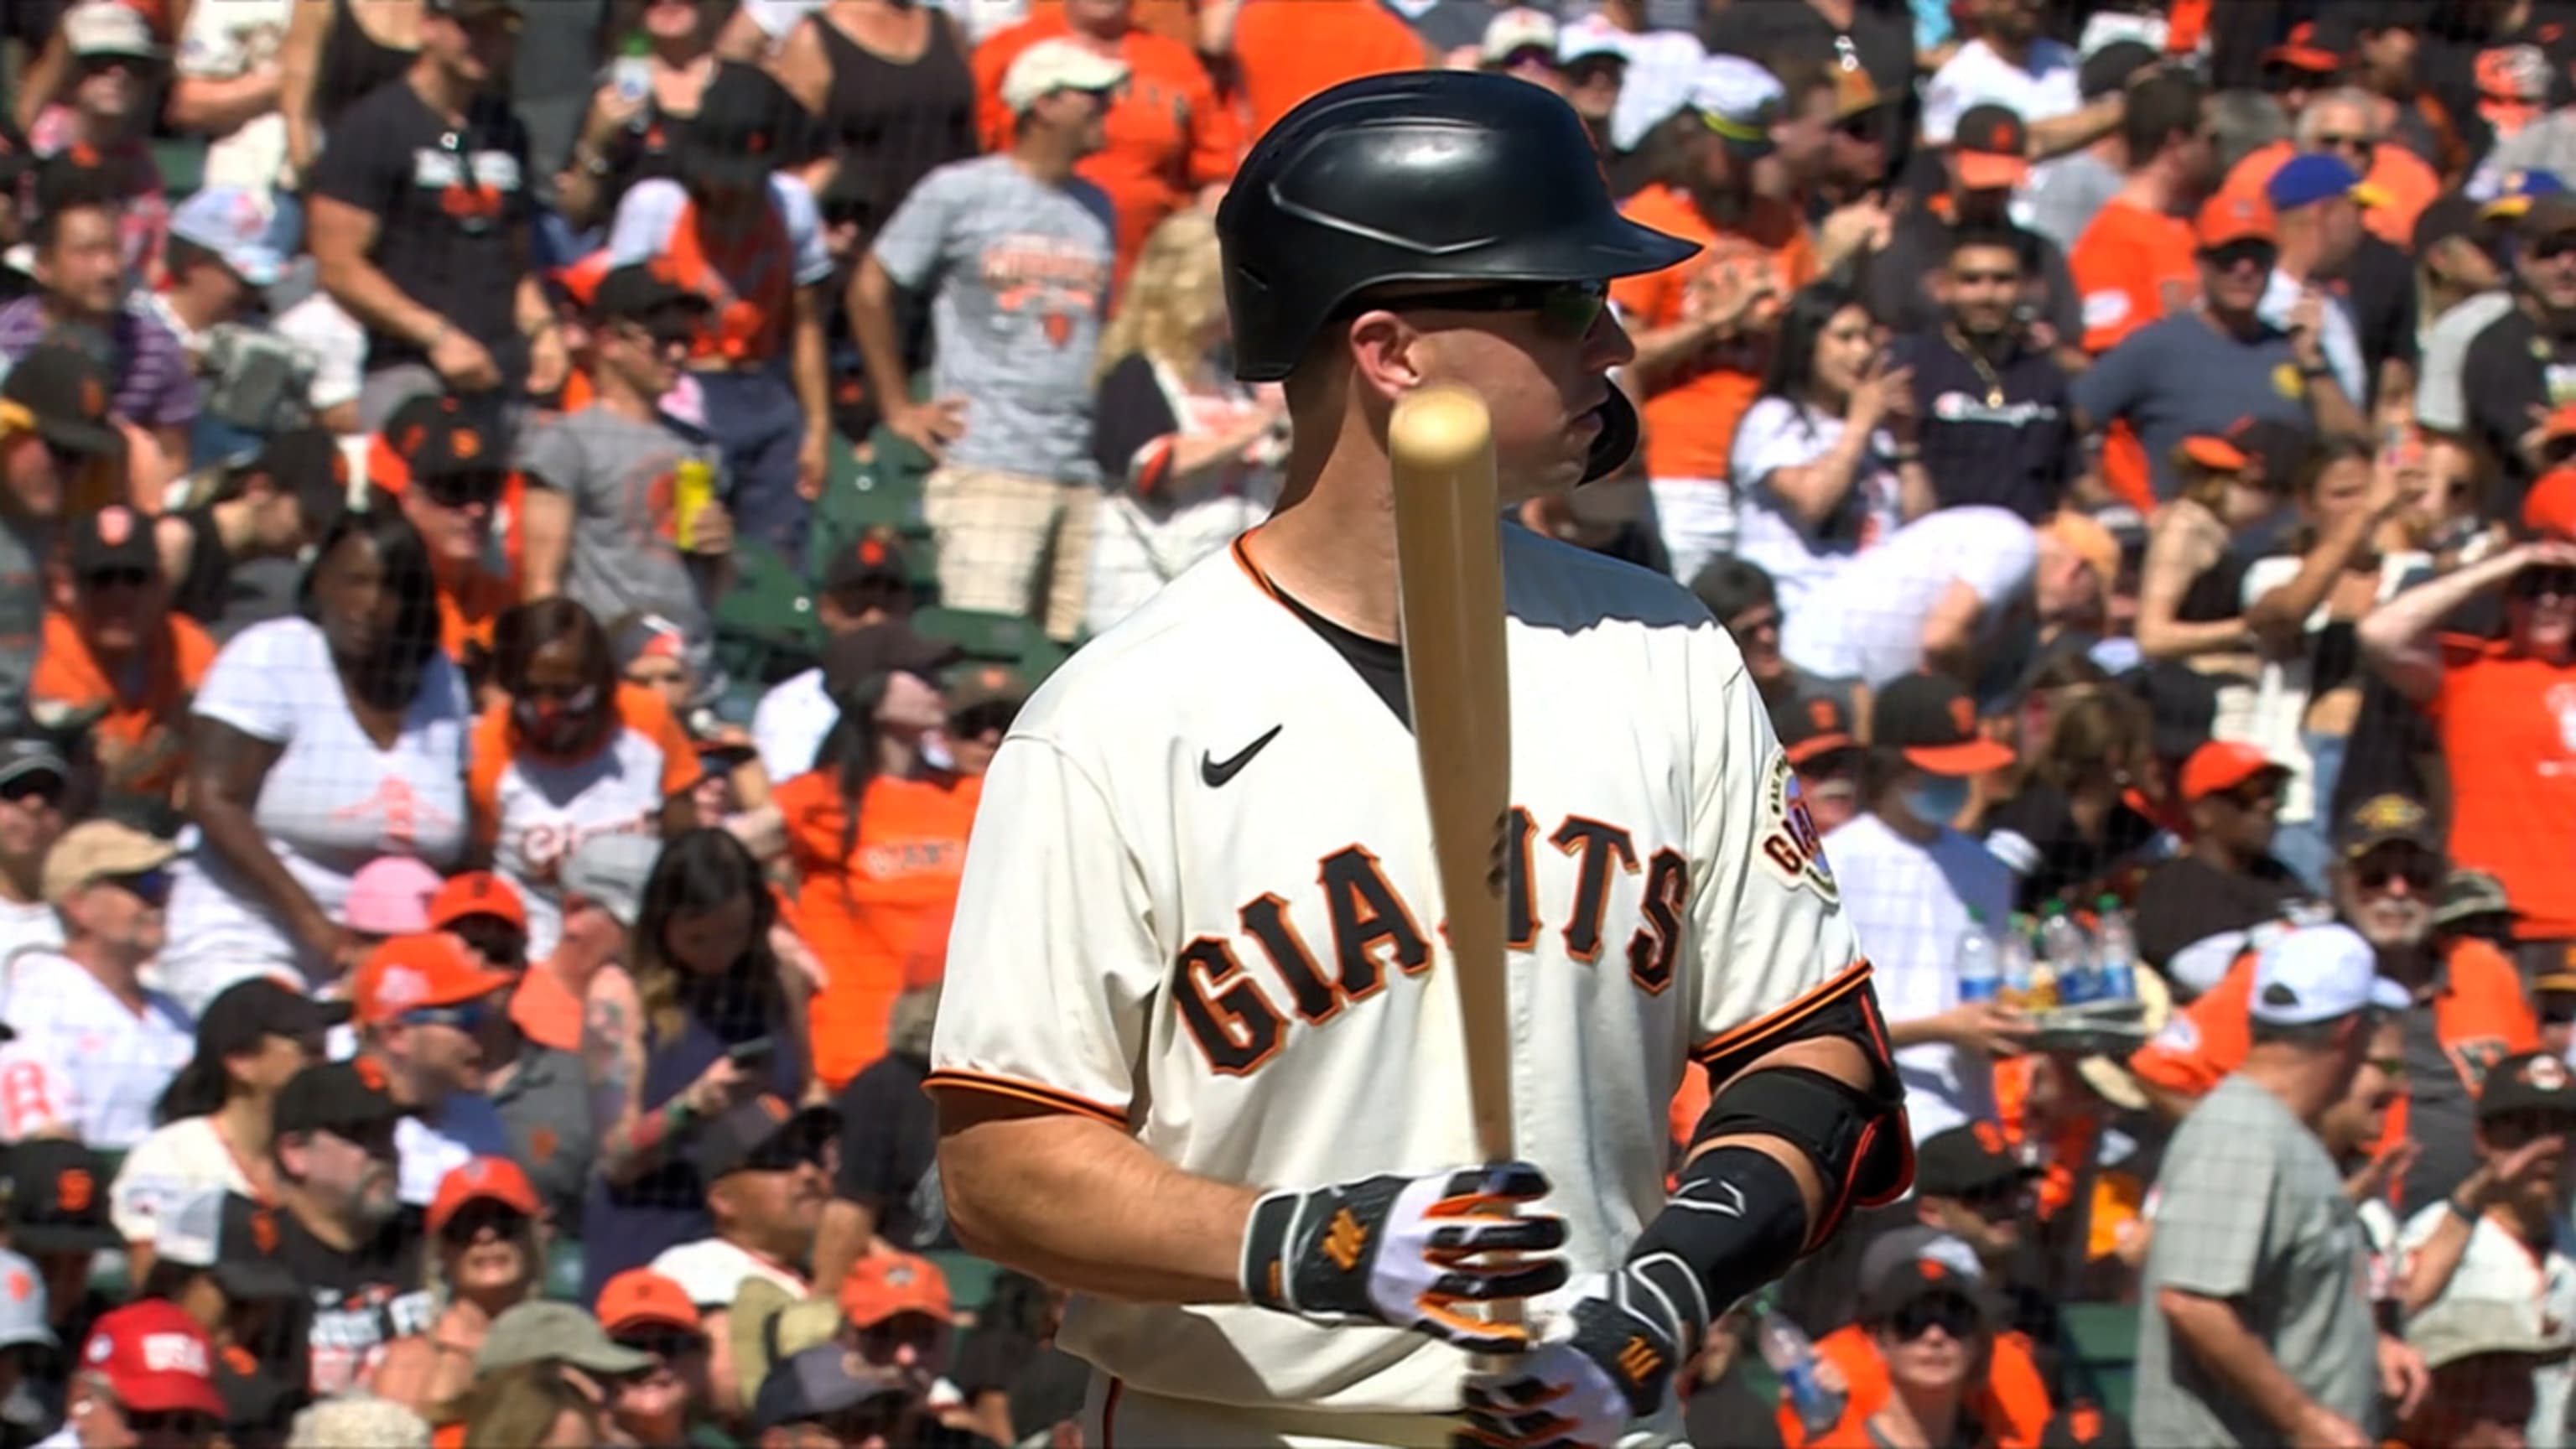 Report - San Francisco Giants' Buster Posey plans to retire